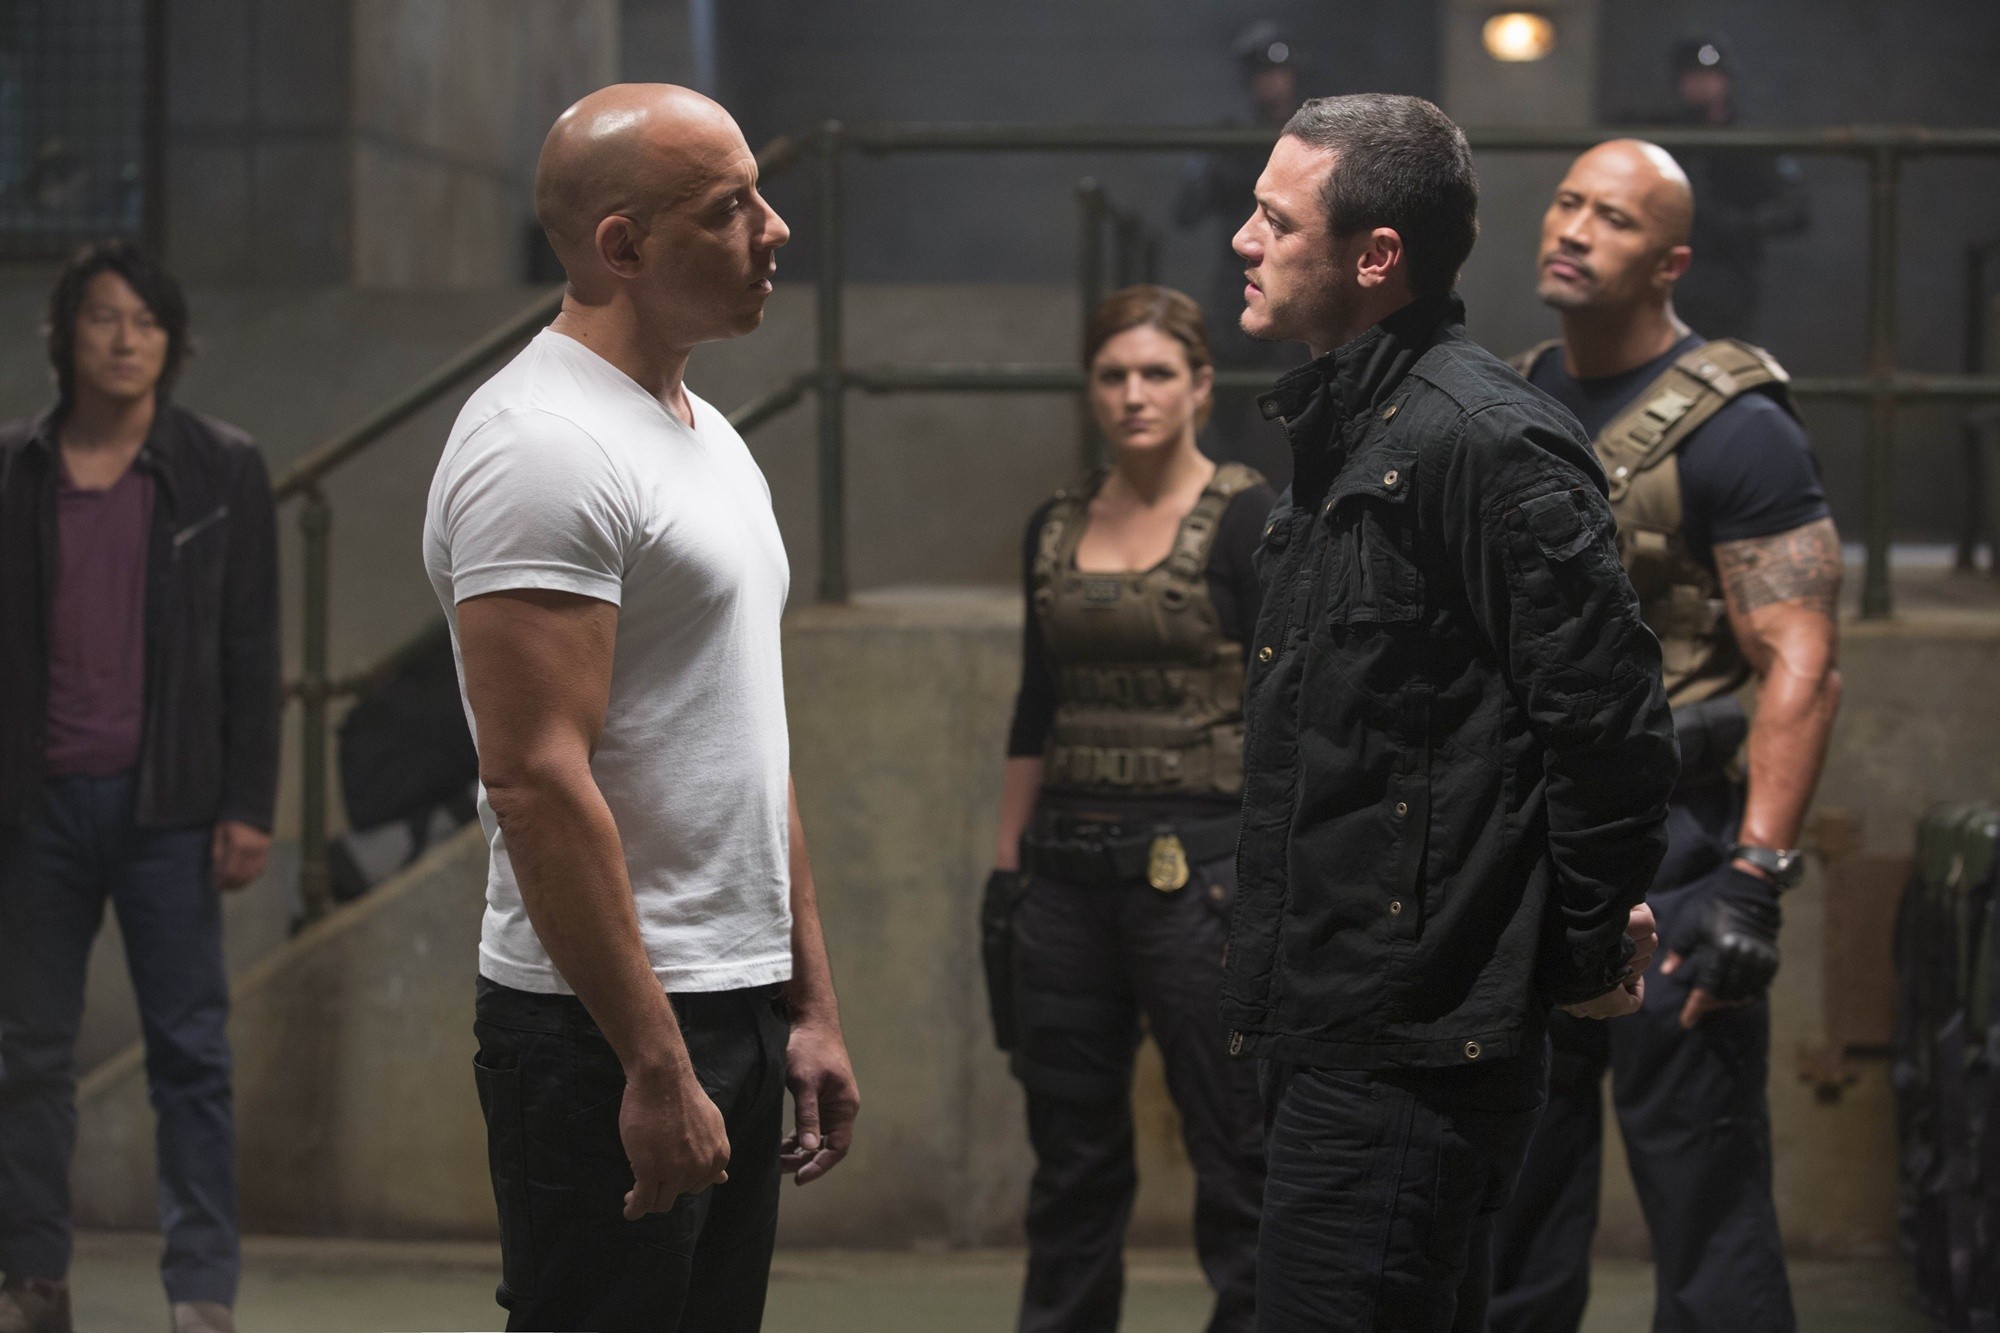 Sung Kang, Vin Diesel, Gina Carano, Luke Evans and The Rock in Universal Pictures' Fast and Furious 6 (2013)